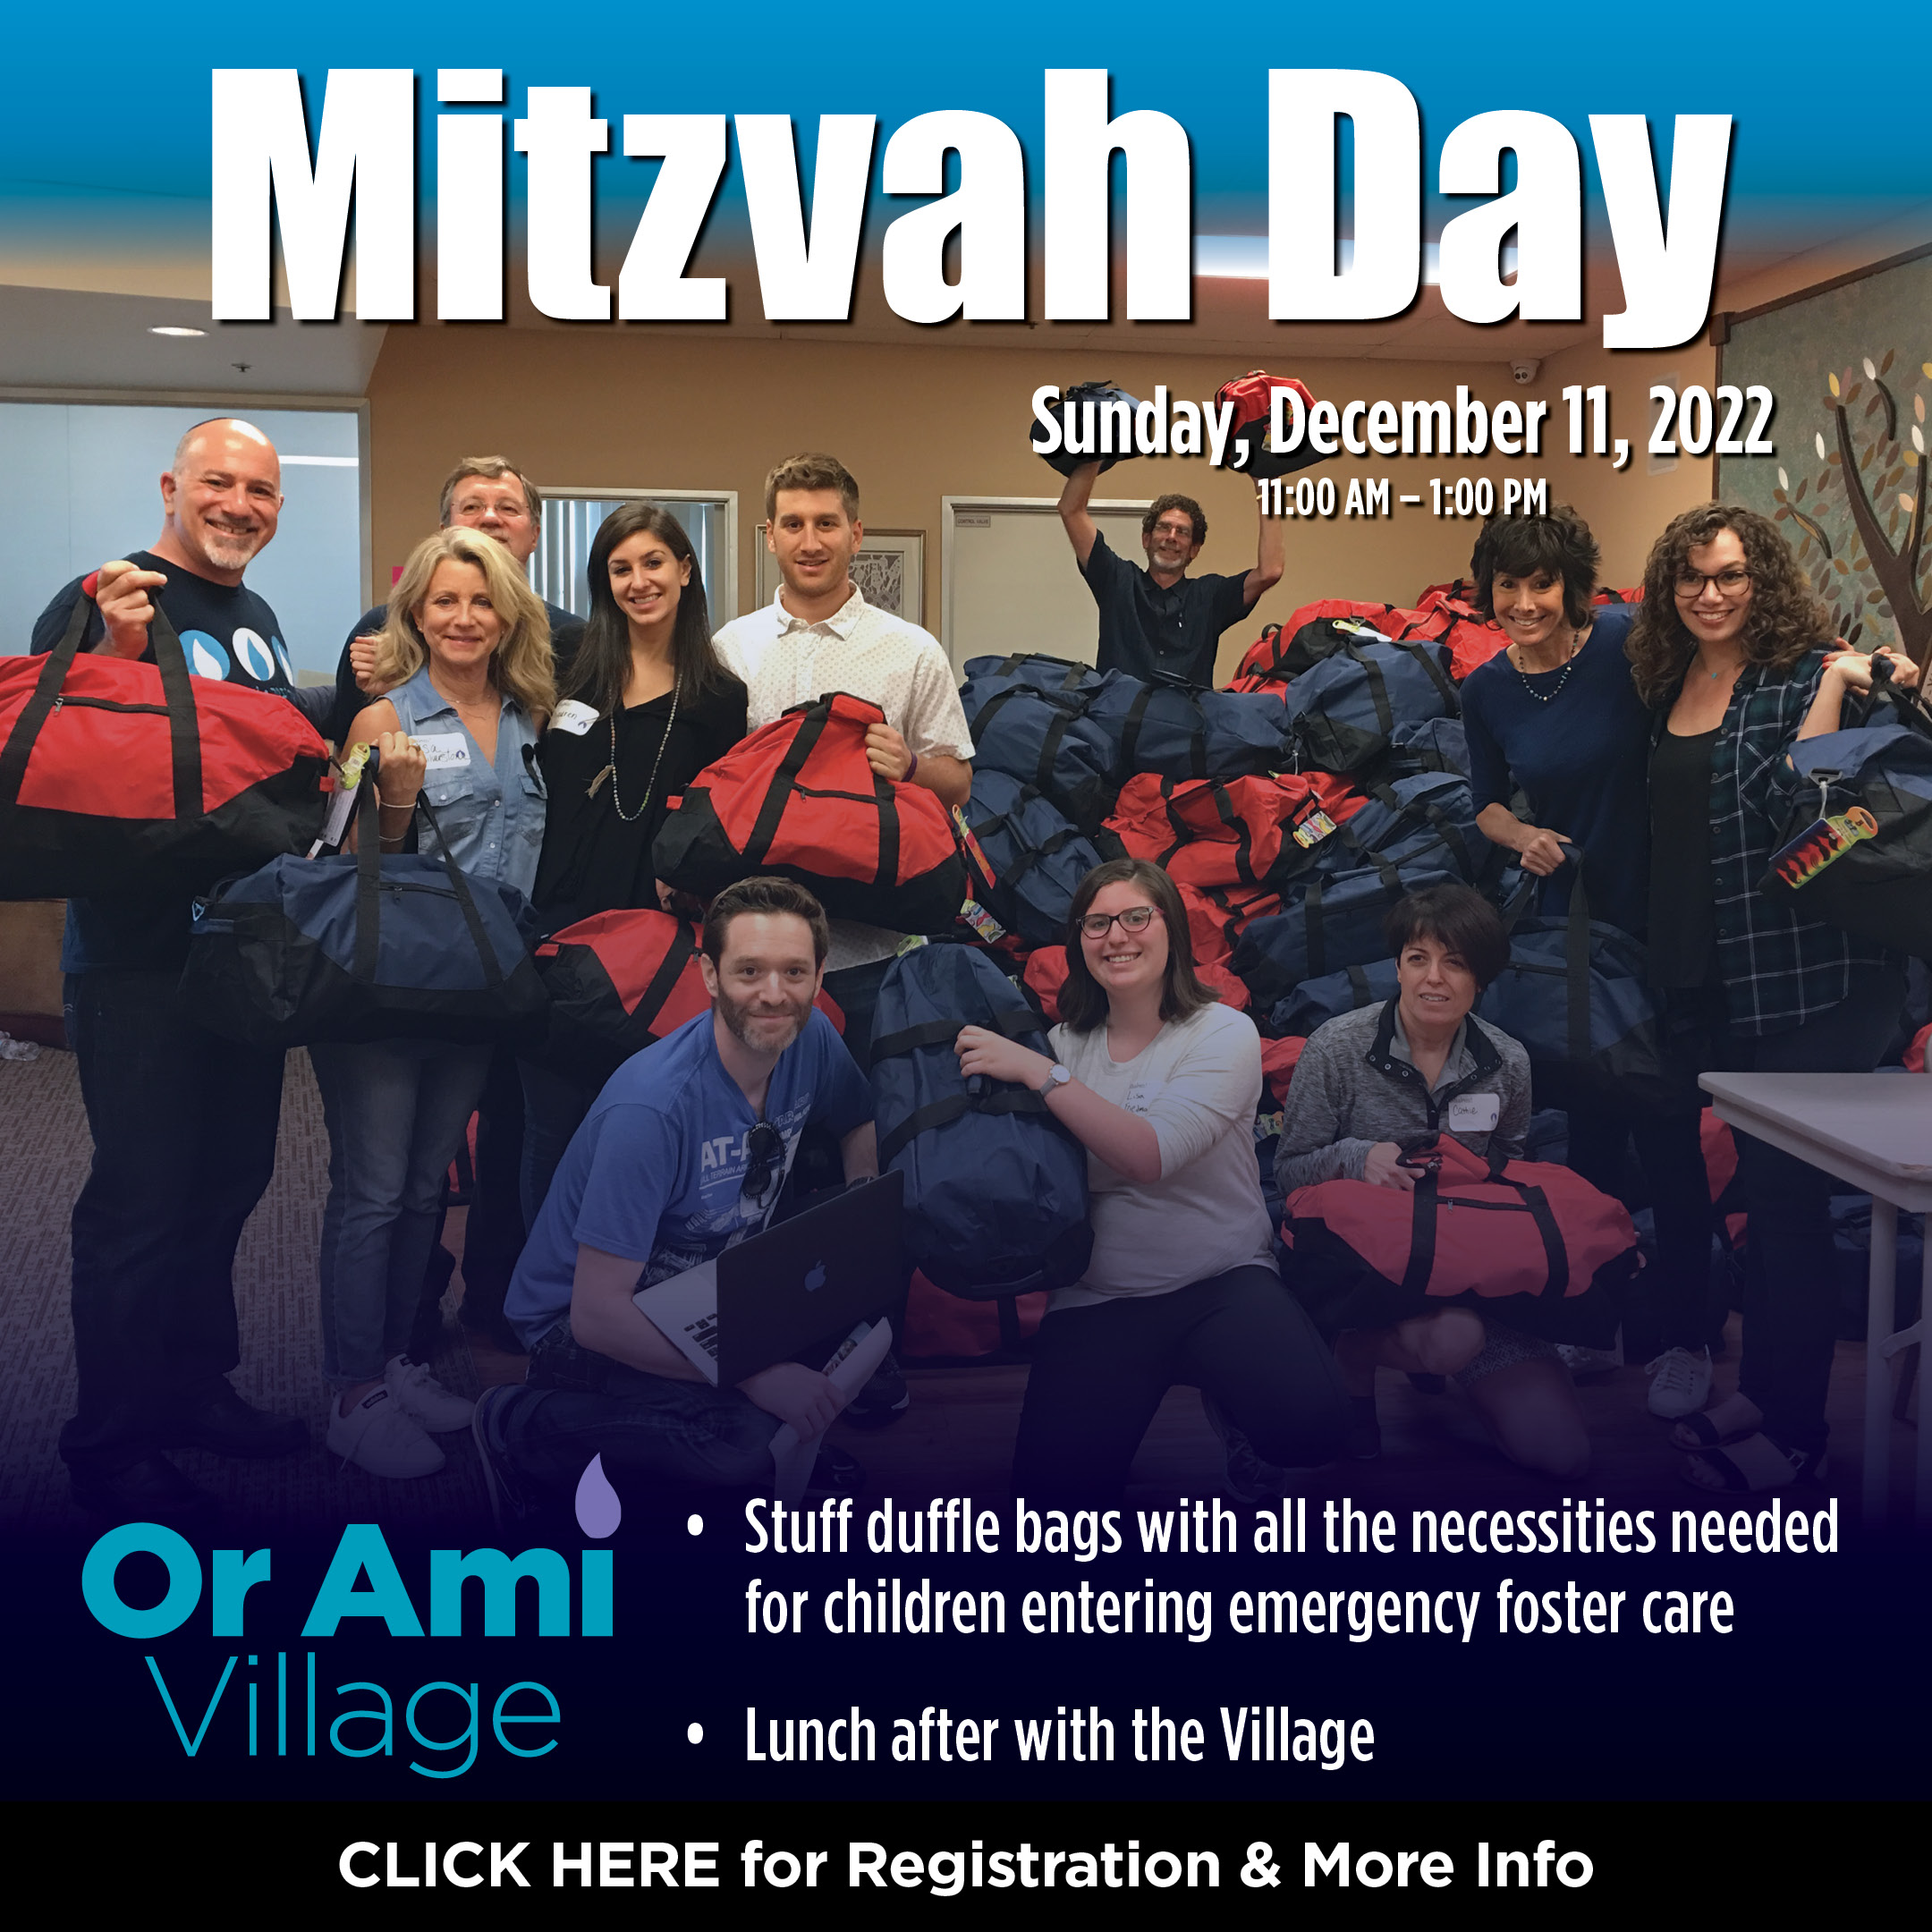 Or Ami Village Mitzvah Day Graphic CLICK